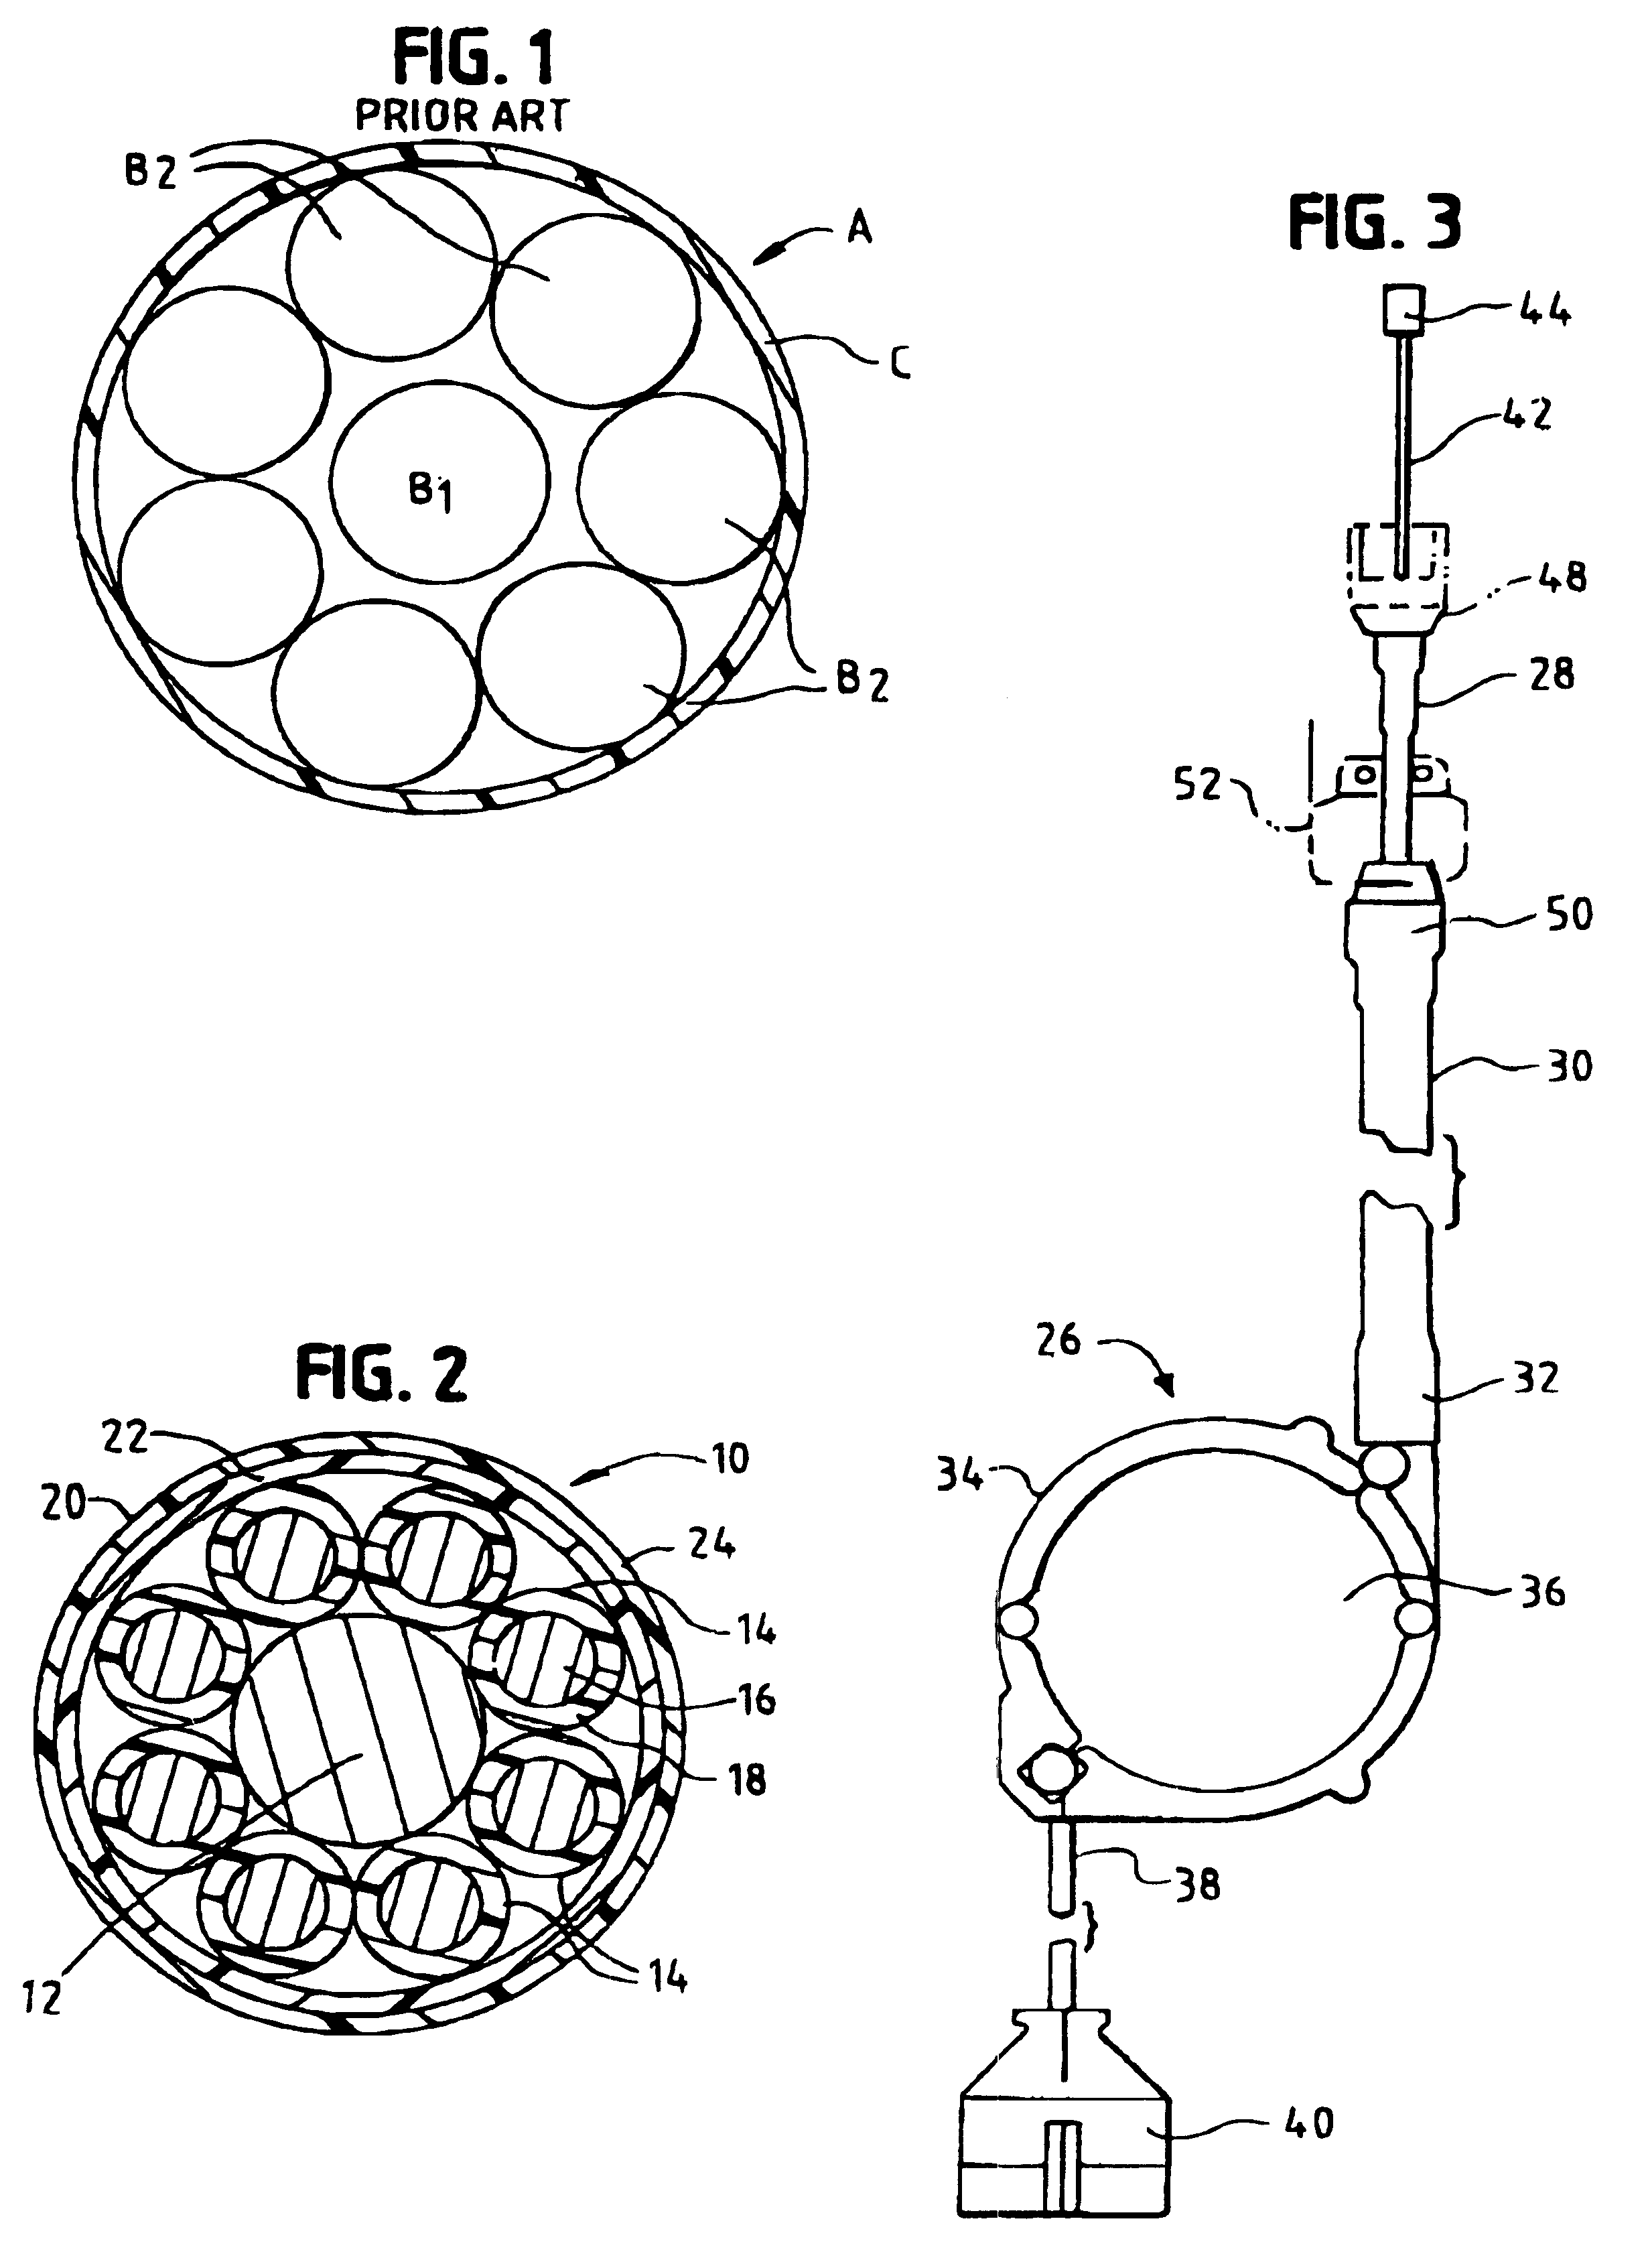 Retractable cord assembly